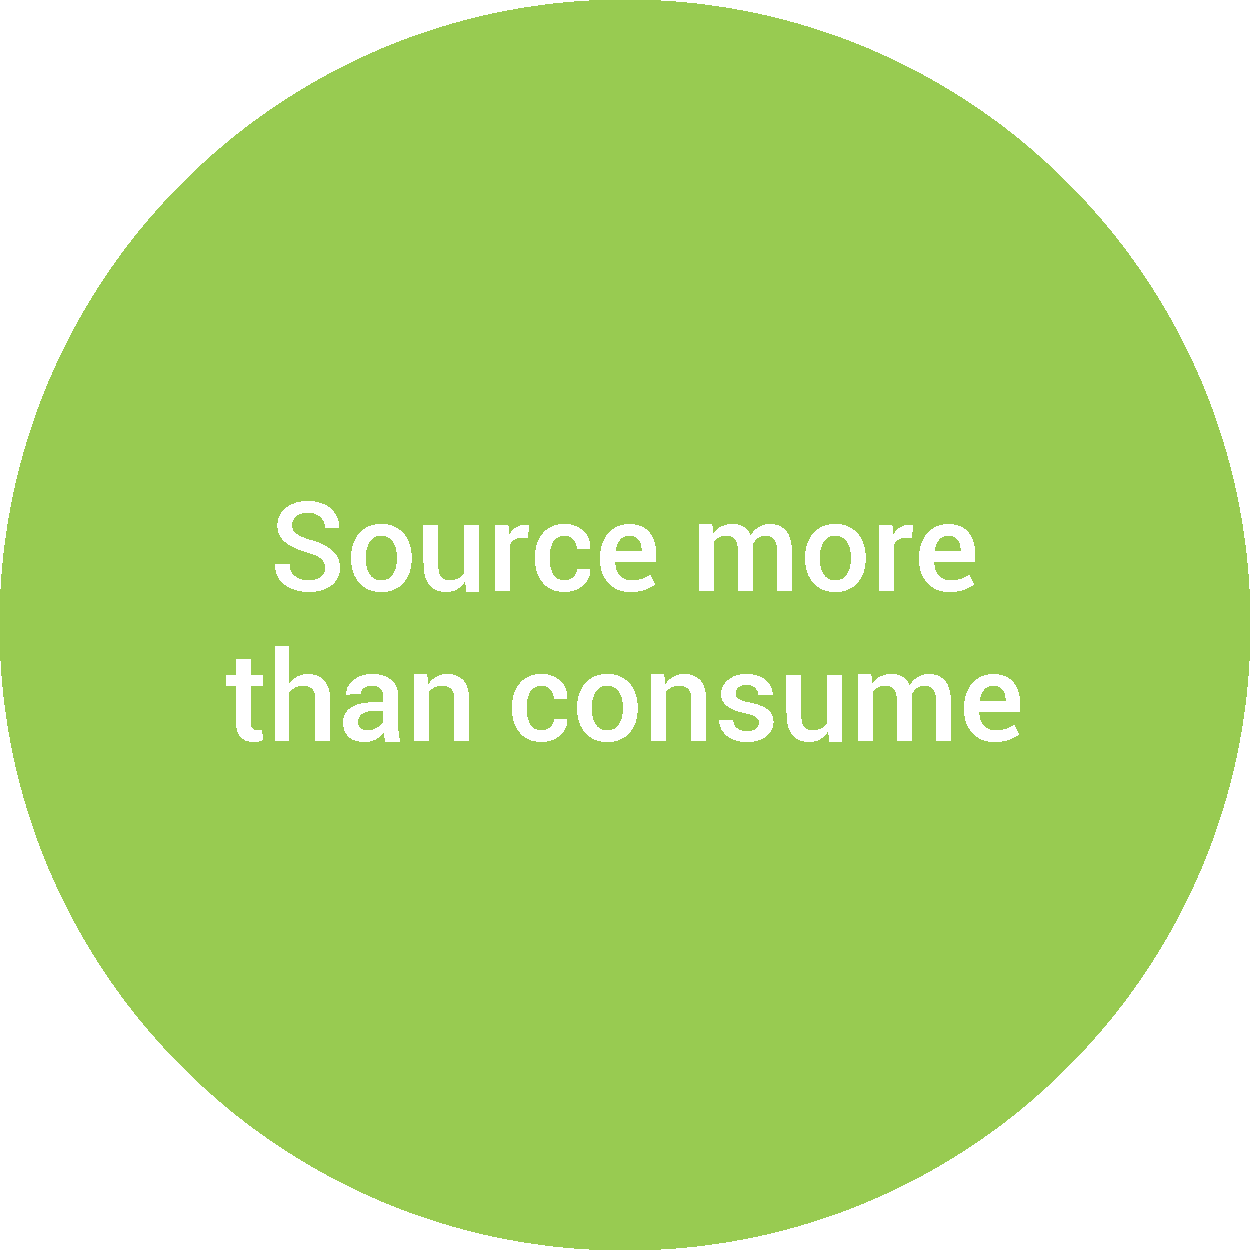 Source more than consume